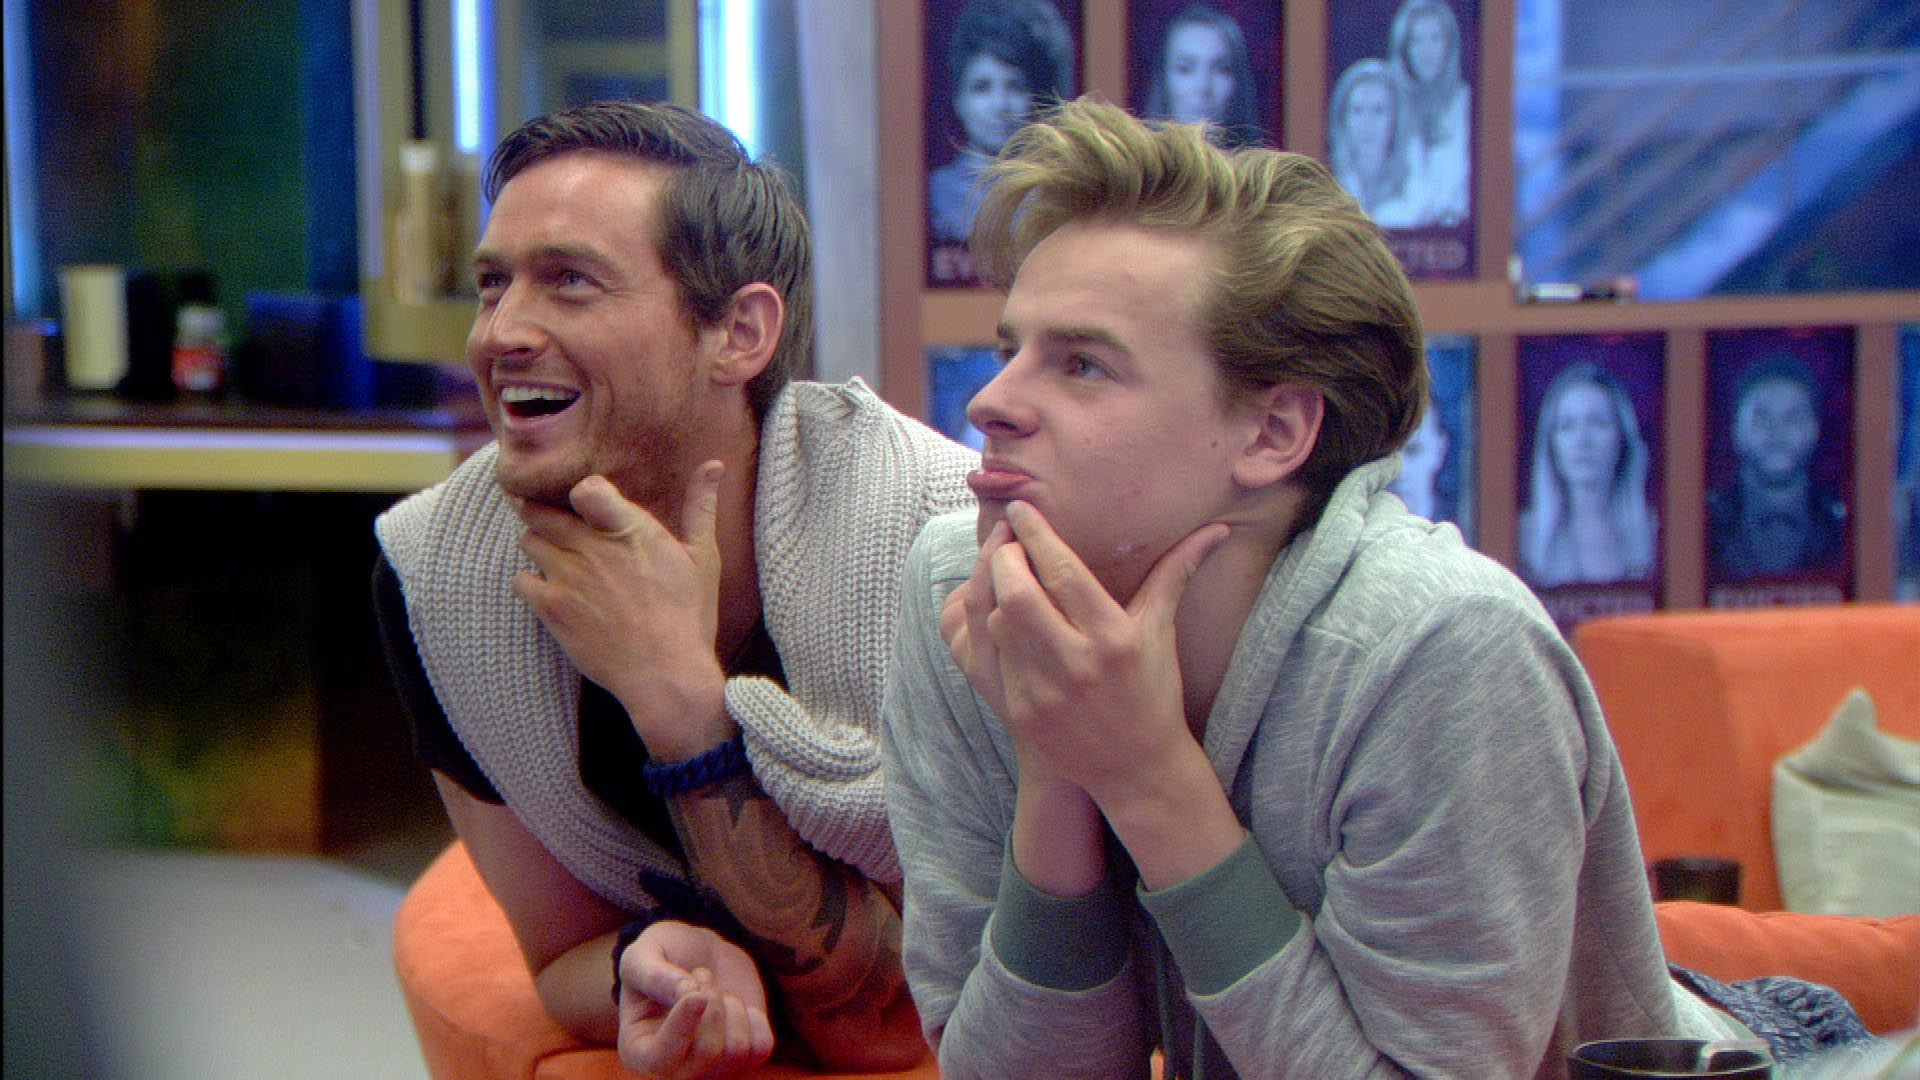 Day 63: Chloe, Danny and Nick reflect on being Big Brother finalists